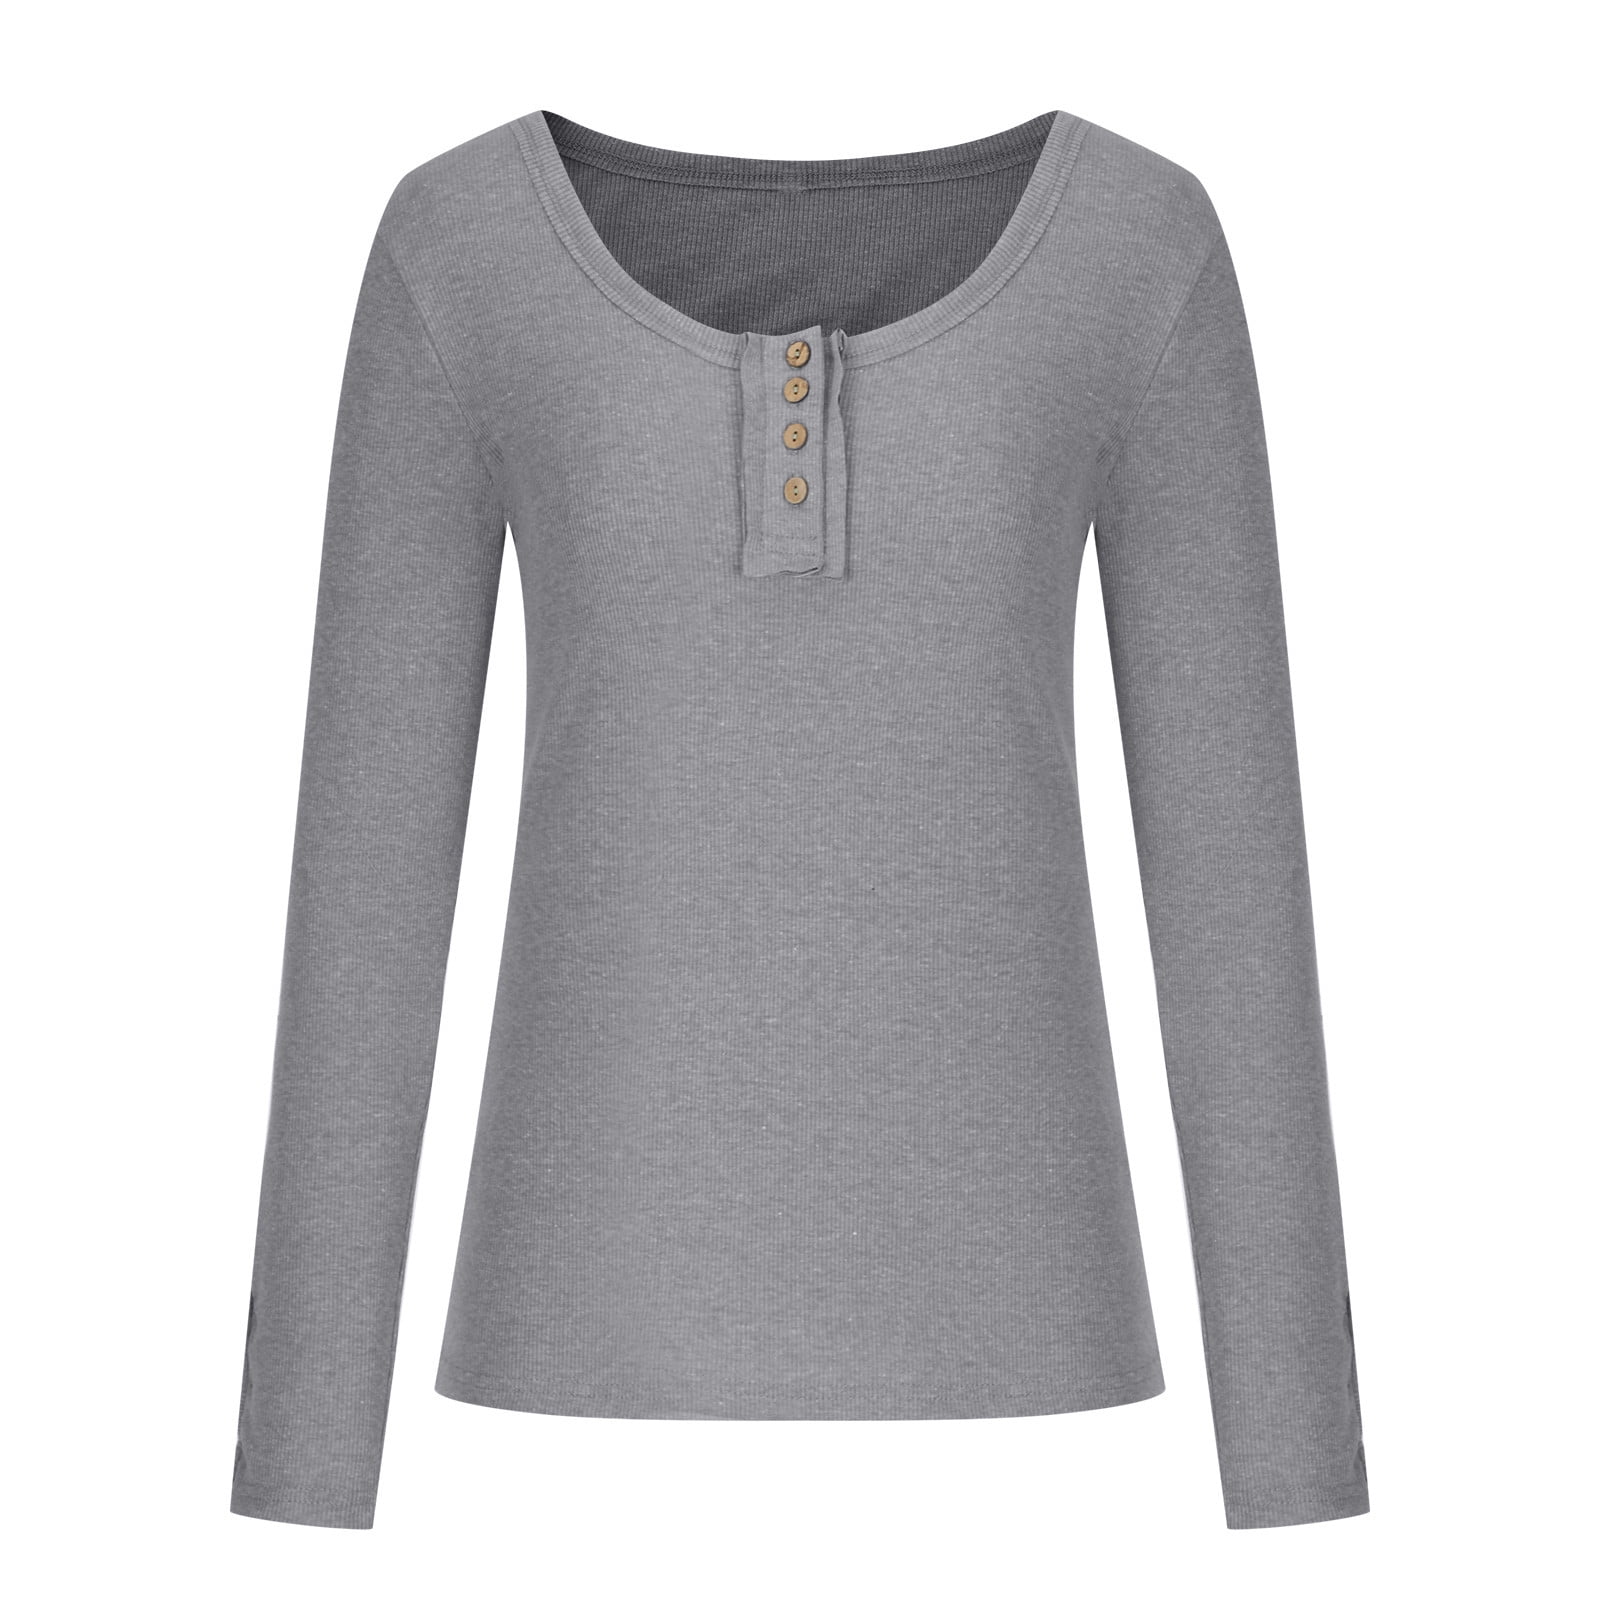 Yyeselk Women’s Long Sleeve Henley T Shirts Button Down Slim Fit Tops Scoop  Neck Ribbed Knit Shirts Casual Solid Color Tee Pullover Top Gray M